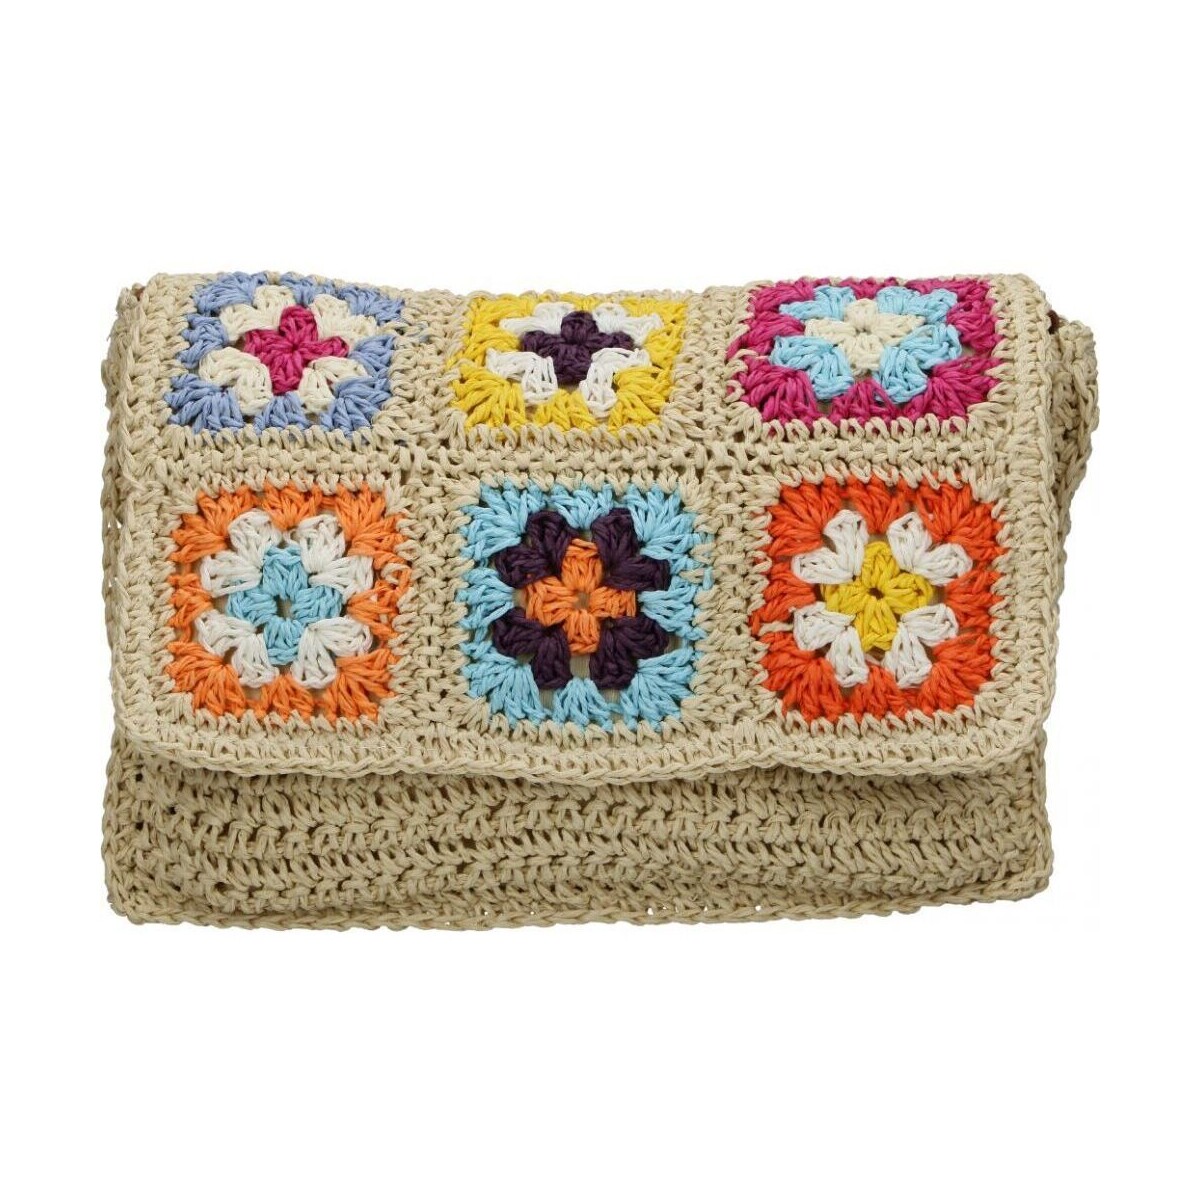 Malas Mulher Pouch / Clutch Irene Bolsos SYS8007-1 Bege